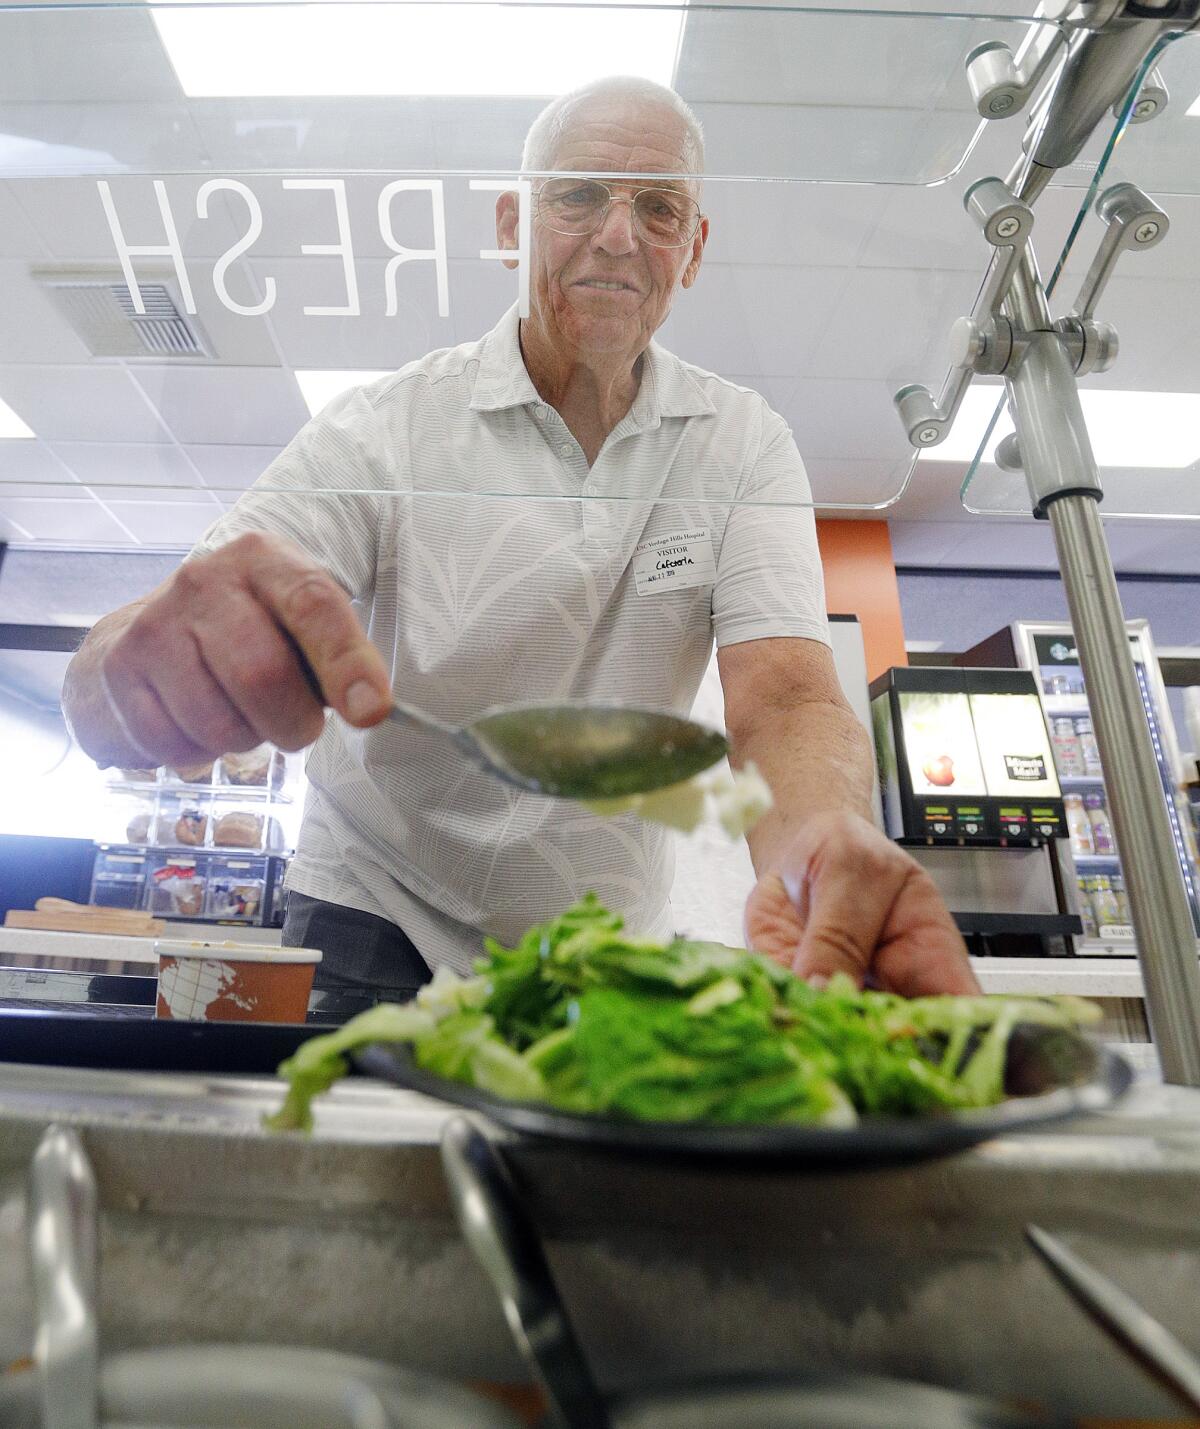 Phil Downs of La Crescenta makes a salad at USC Verdugo Hills Hospital on a recent Thursday. The hospital is offering seniors a 30% discount from 4 to 8 p.m., seven days a week, to encourage seniors to socialize over healthy meals.